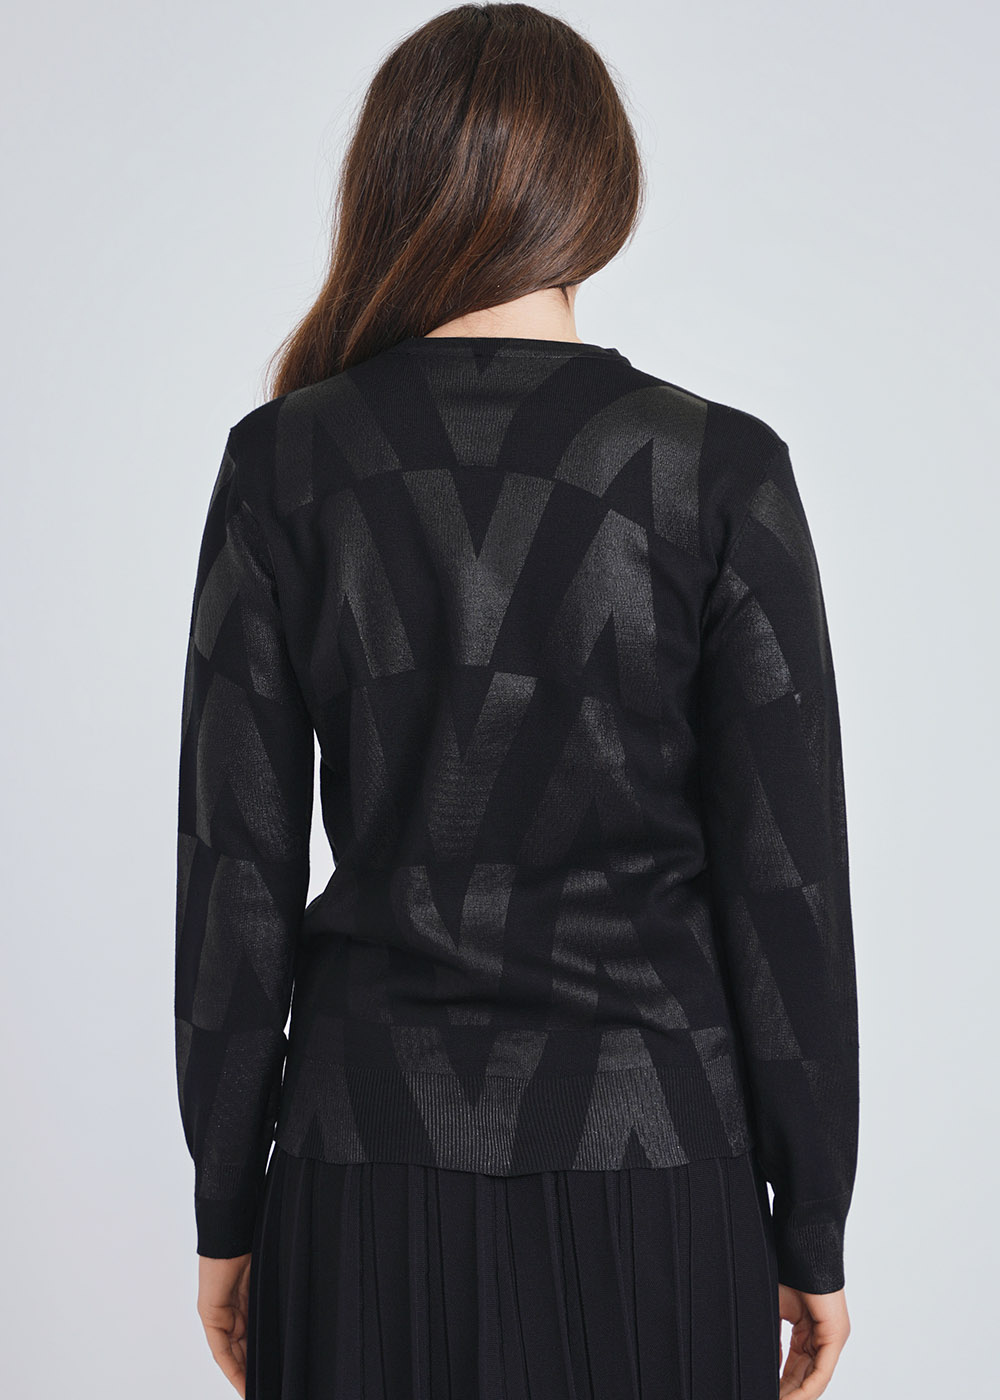 Black Knit Top with V-Structured Symmetry